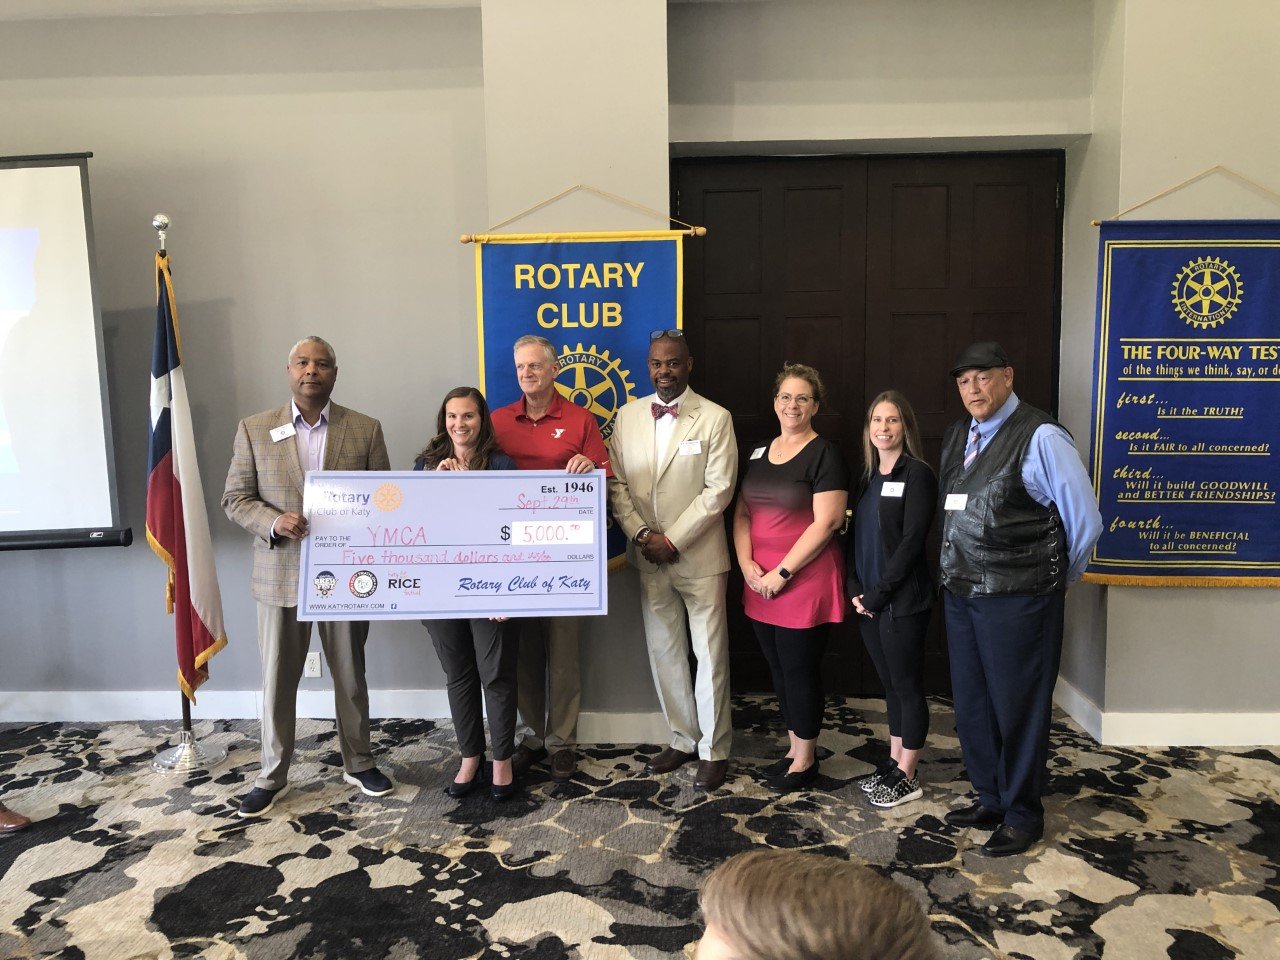 The Rotary Club of Katy made a donation to the Katy YMCA. Pictured from left to right are Jerry Moye, Katlyn Balson, Randy Carter, J.R. Richardson, Vicki Rao, Callie Kuehler and Thom Polvogt.